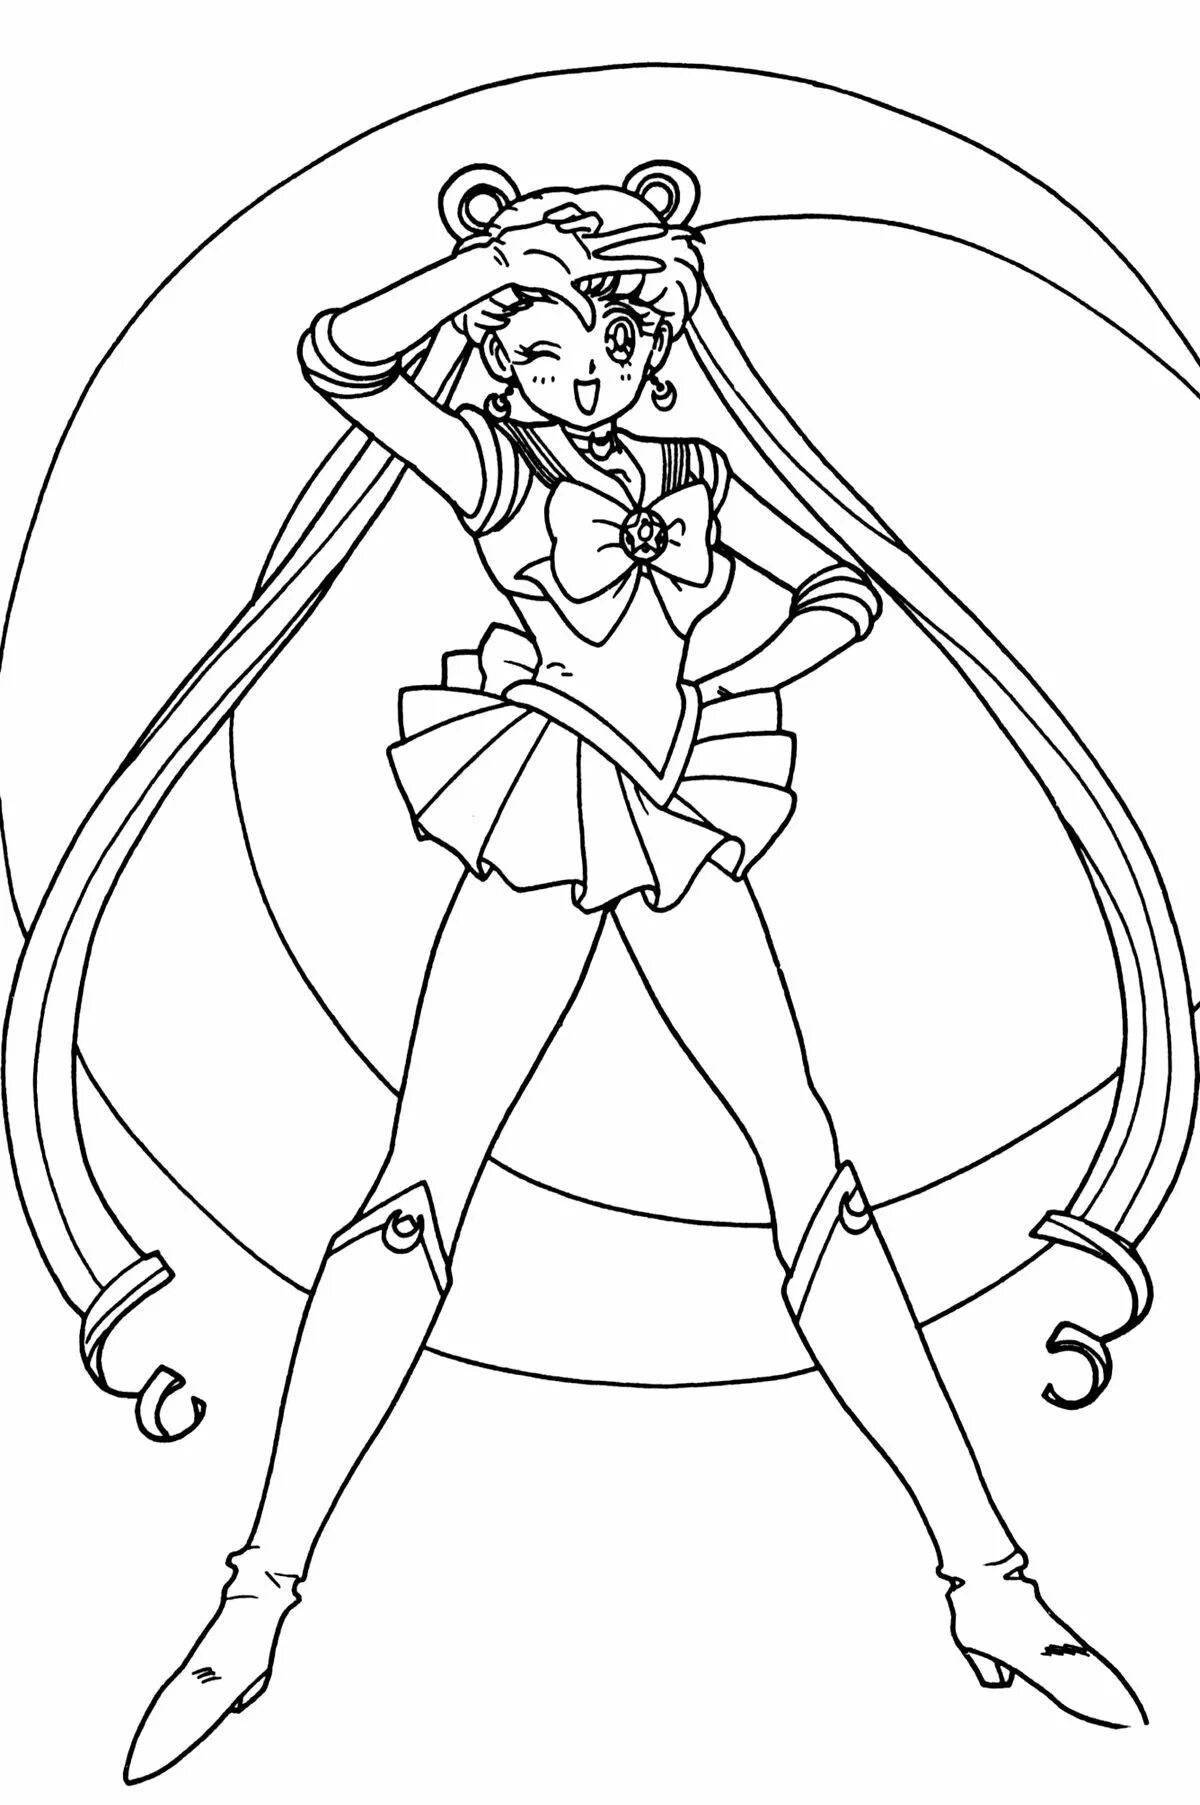 Sailor moon dazzling coloring book for girls